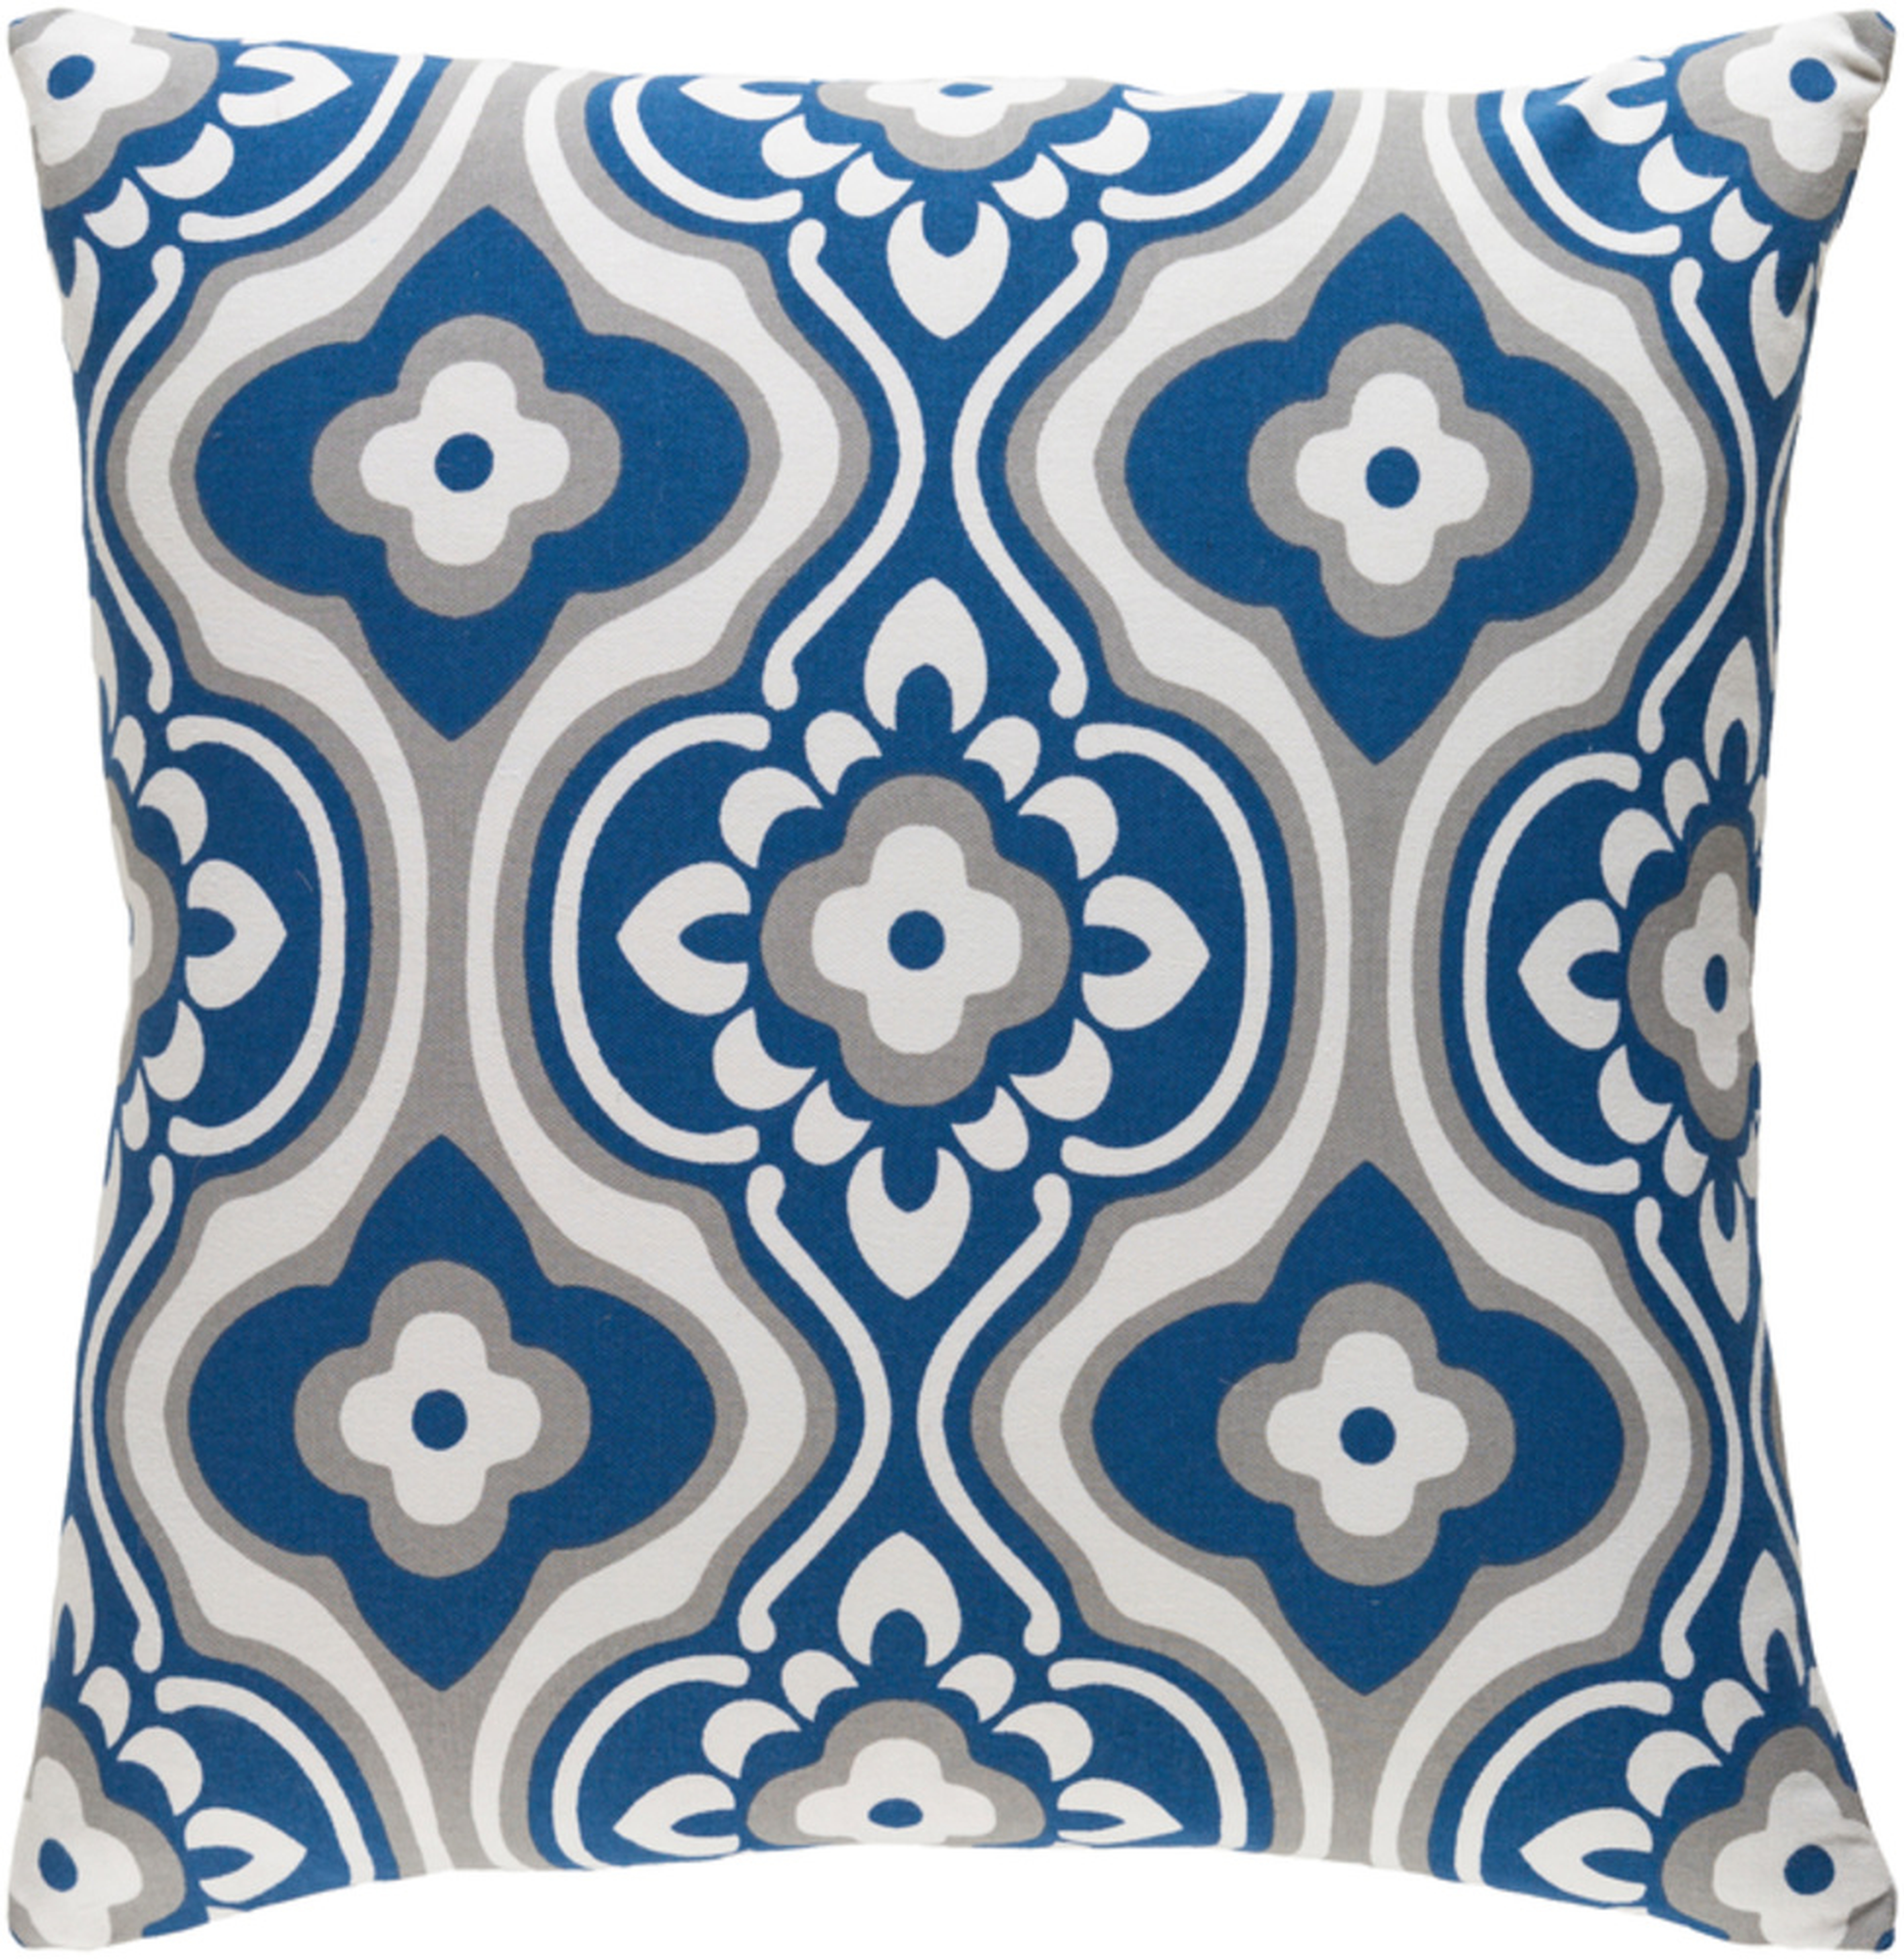 Trudy - 18" x 18" Pillow Cover - Surya